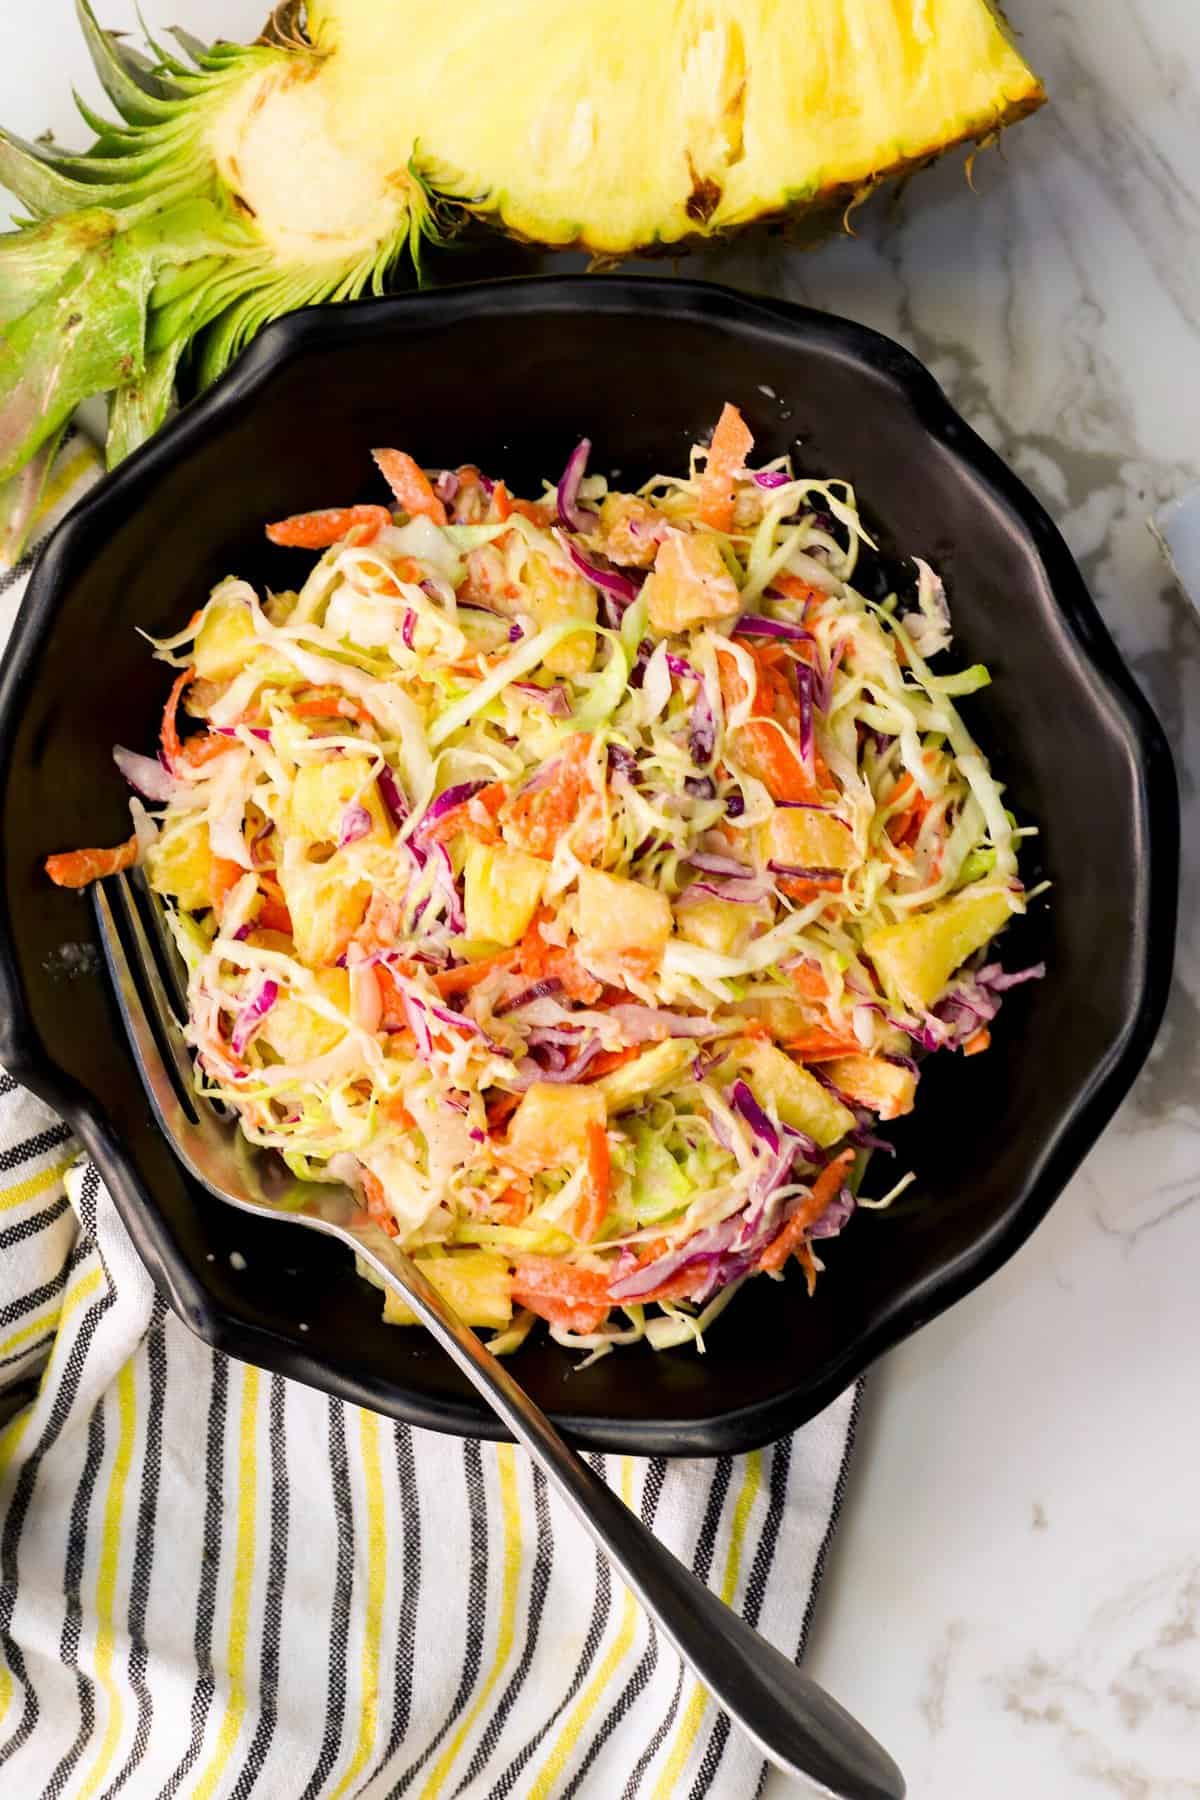 Tropical delight pineapple coleslaw perfect for a family cookout